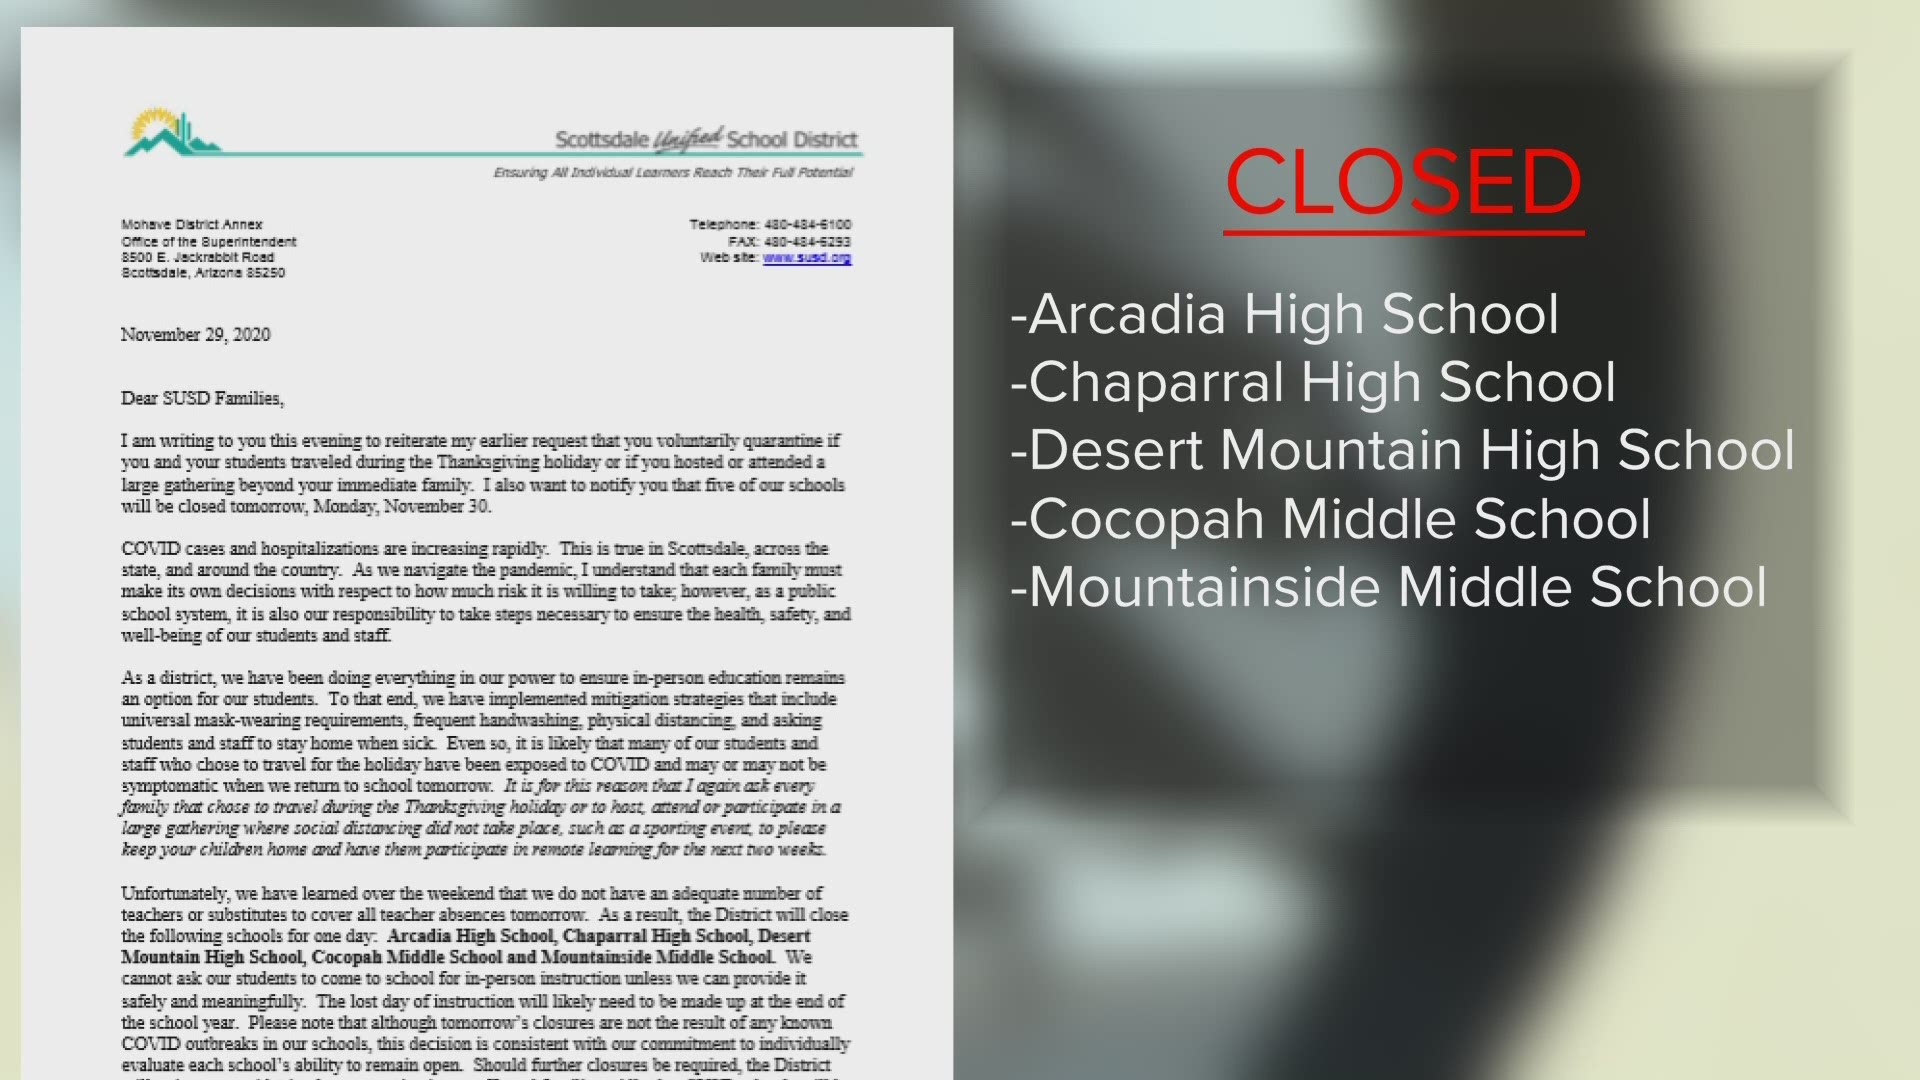 Five Scottsdale schools did not open the Monday after Thanksgiving break. The district says there weren't enough teachers or subs to cover classes.